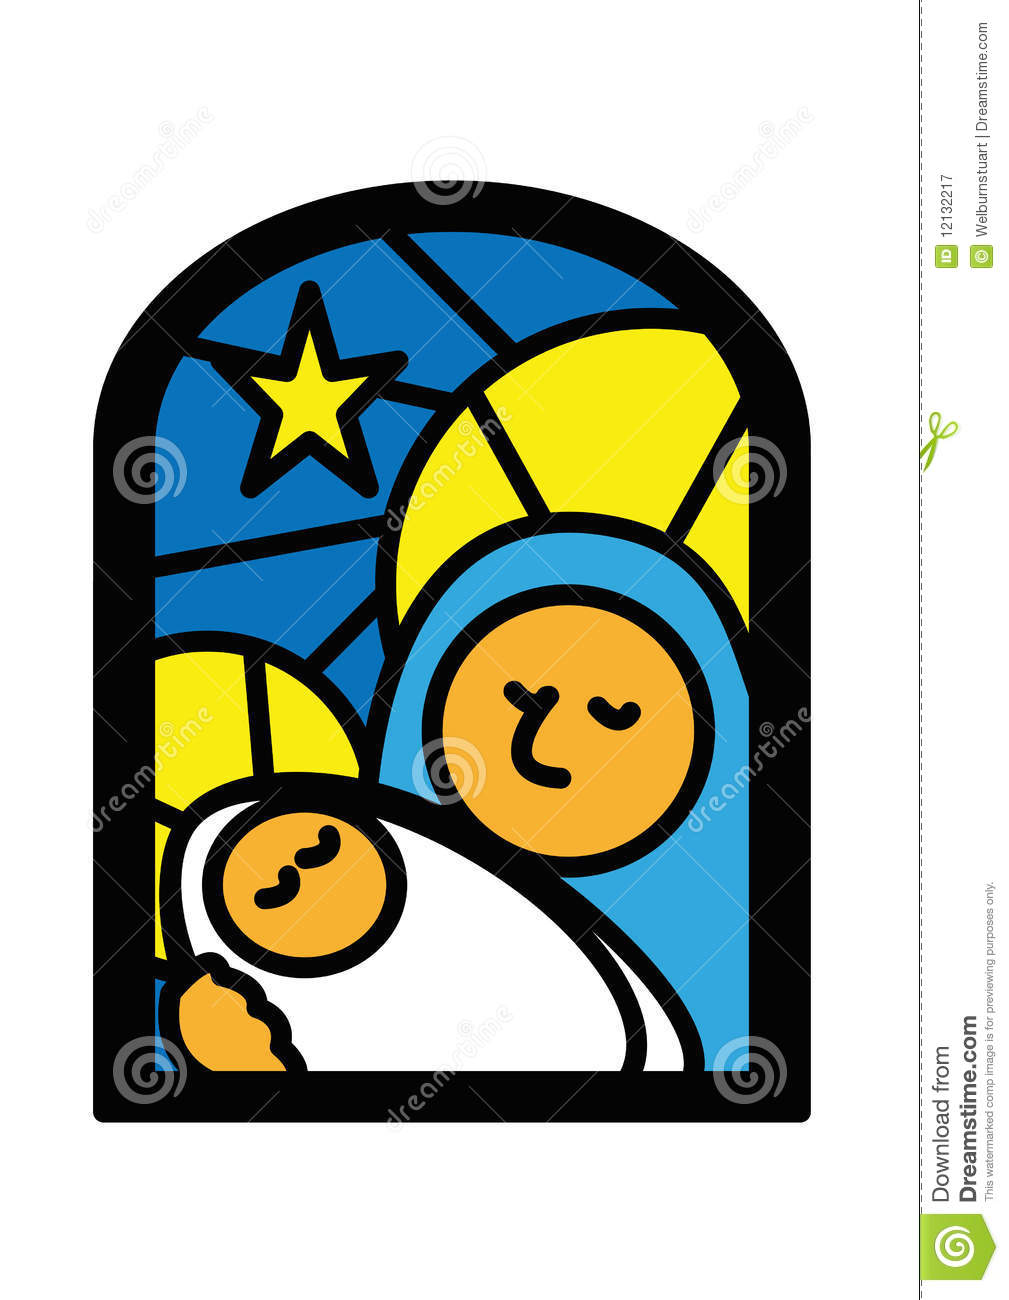 Christmas Window Mary And Jesus Royalty Free Stock Photography   Image